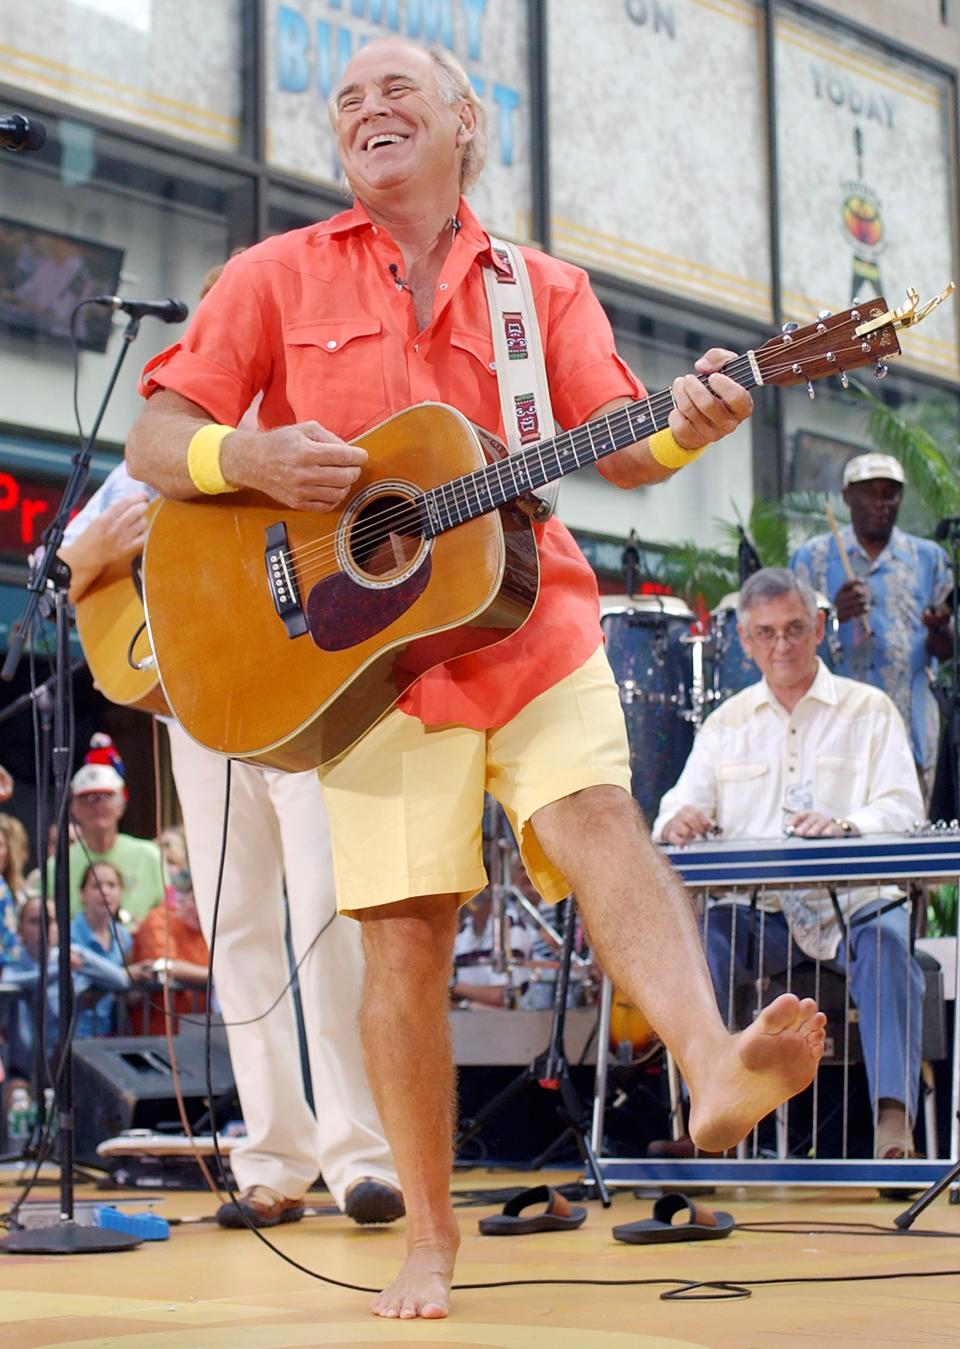 Singer Jimmy Buffett performs barefooted with his band The Coral Reefers on the NBC "Today" television show summer concert series in New York's Rockefeller Plaza, on June 25, 2004. “Margaritaville” singer-songwriter Jimmy Buffett has died at age 76.